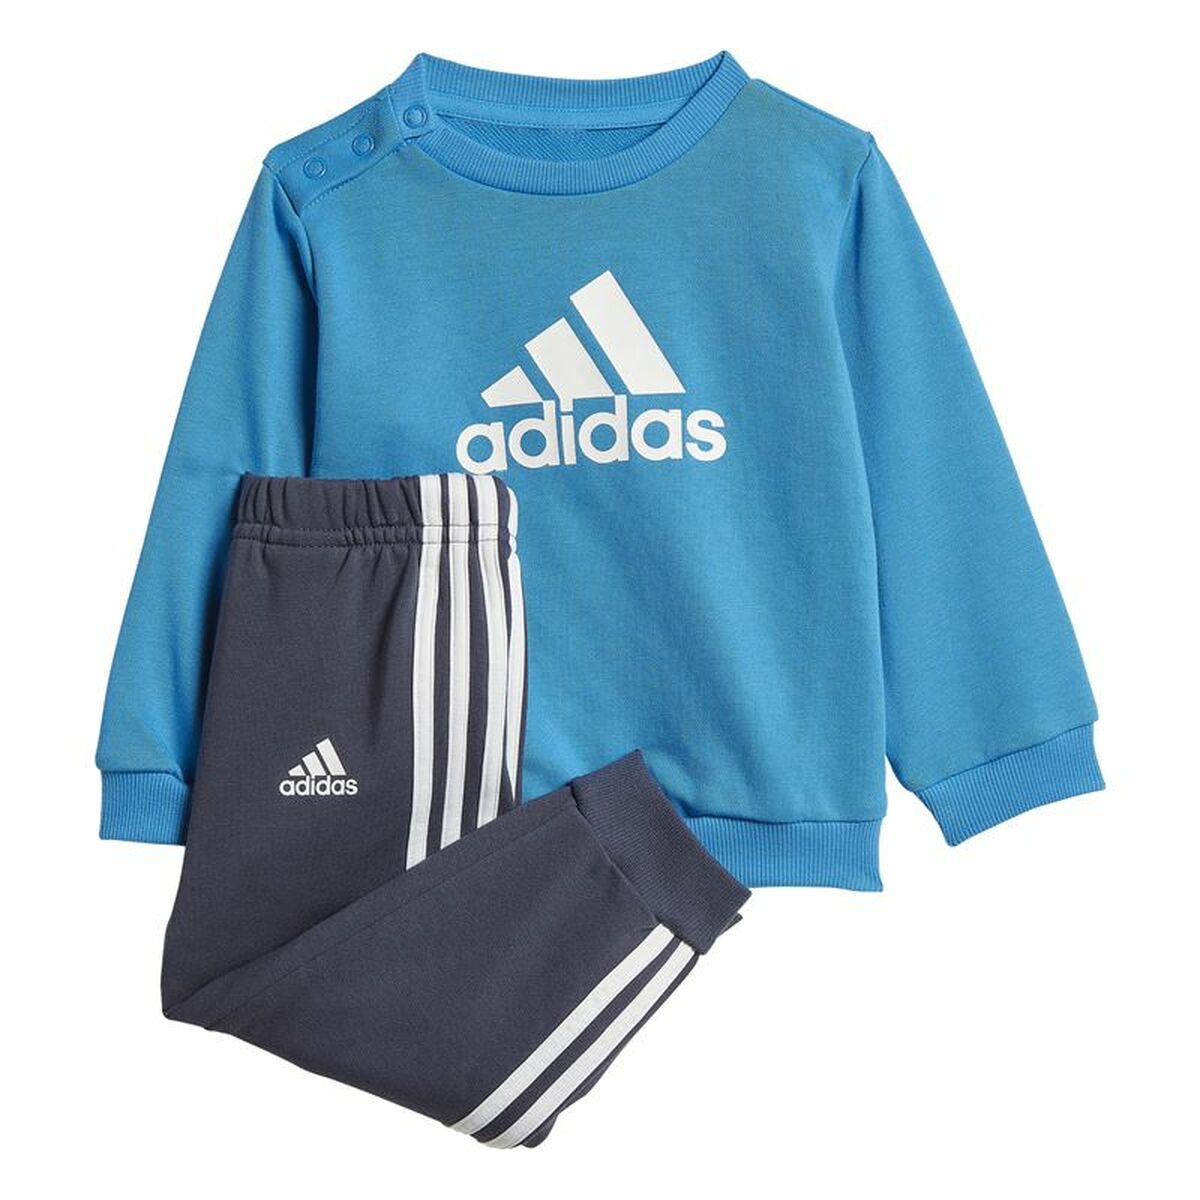 Sports Outfit for Baby Adidas Badge of Sport French Terry Blue